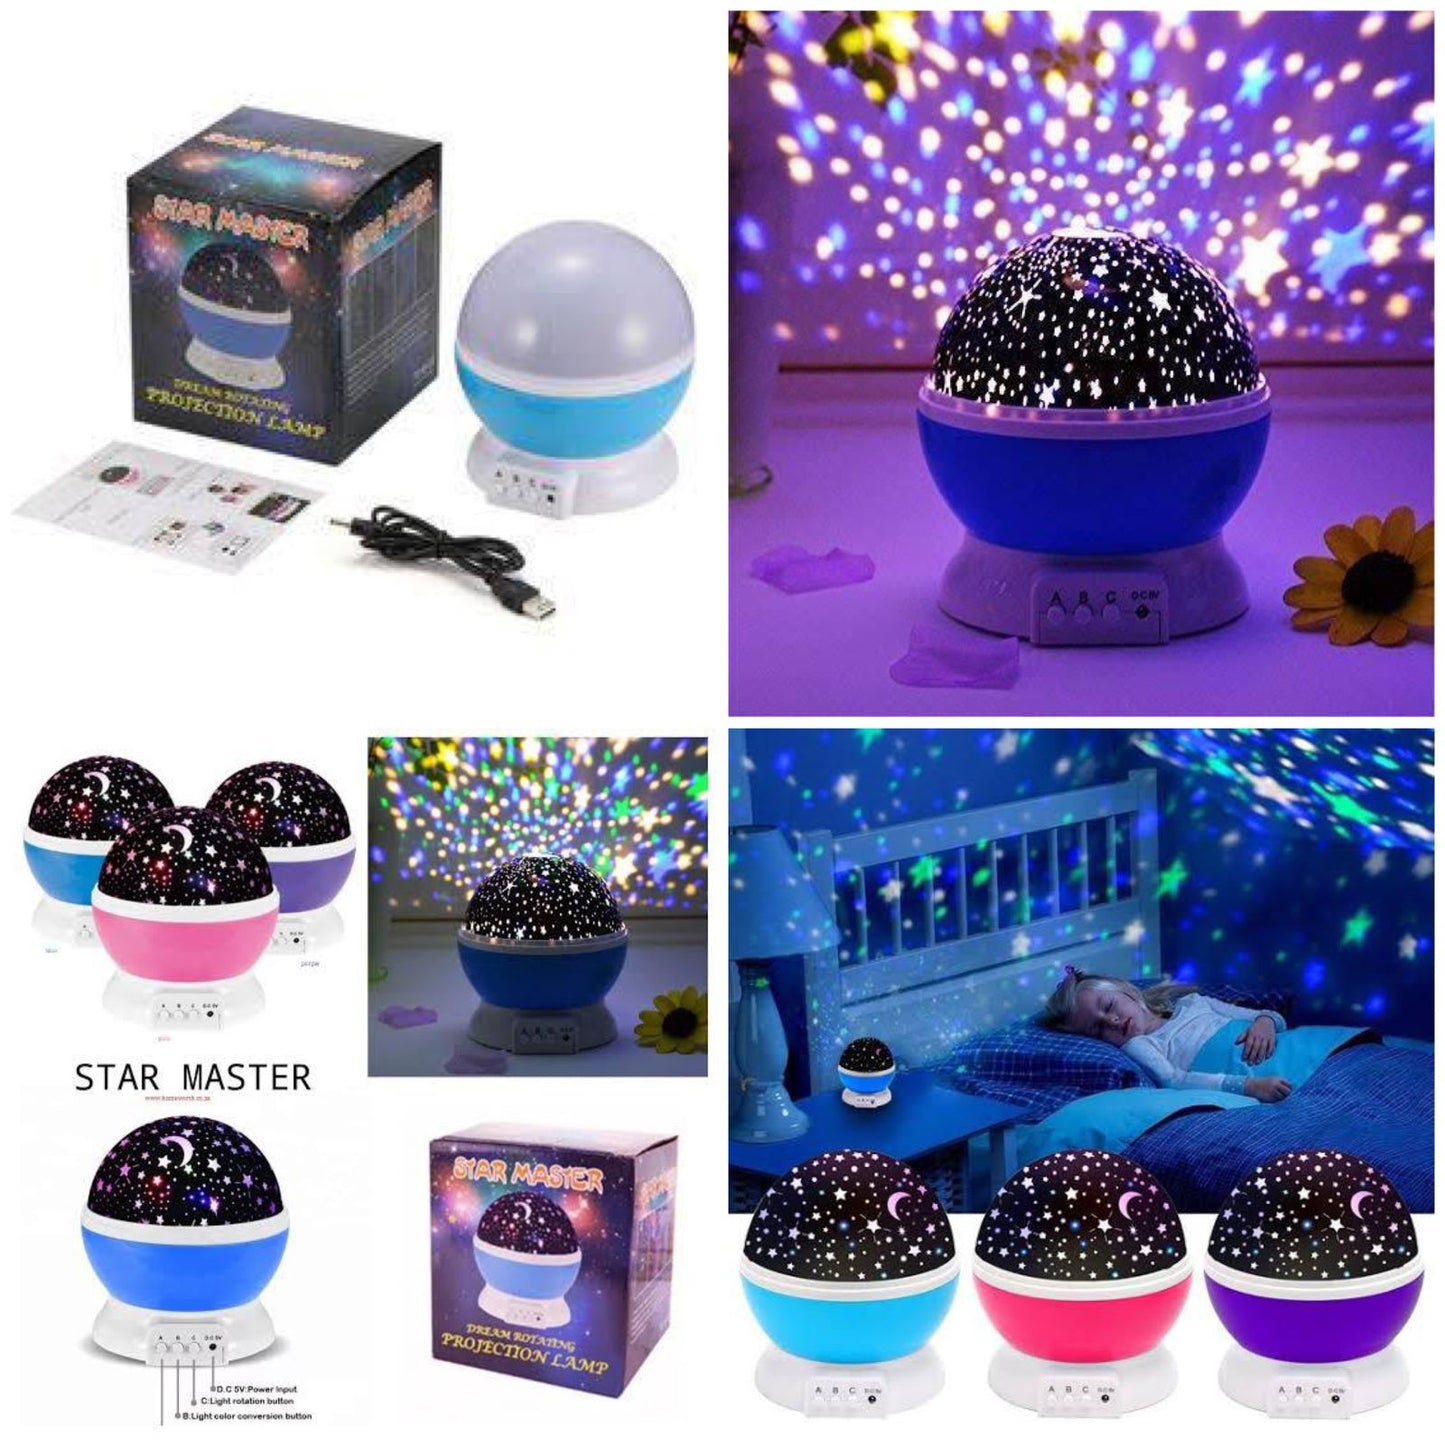 Auto Rotating Projection Night Stars Lamp with 3 Modes (USB and Cell Operate both